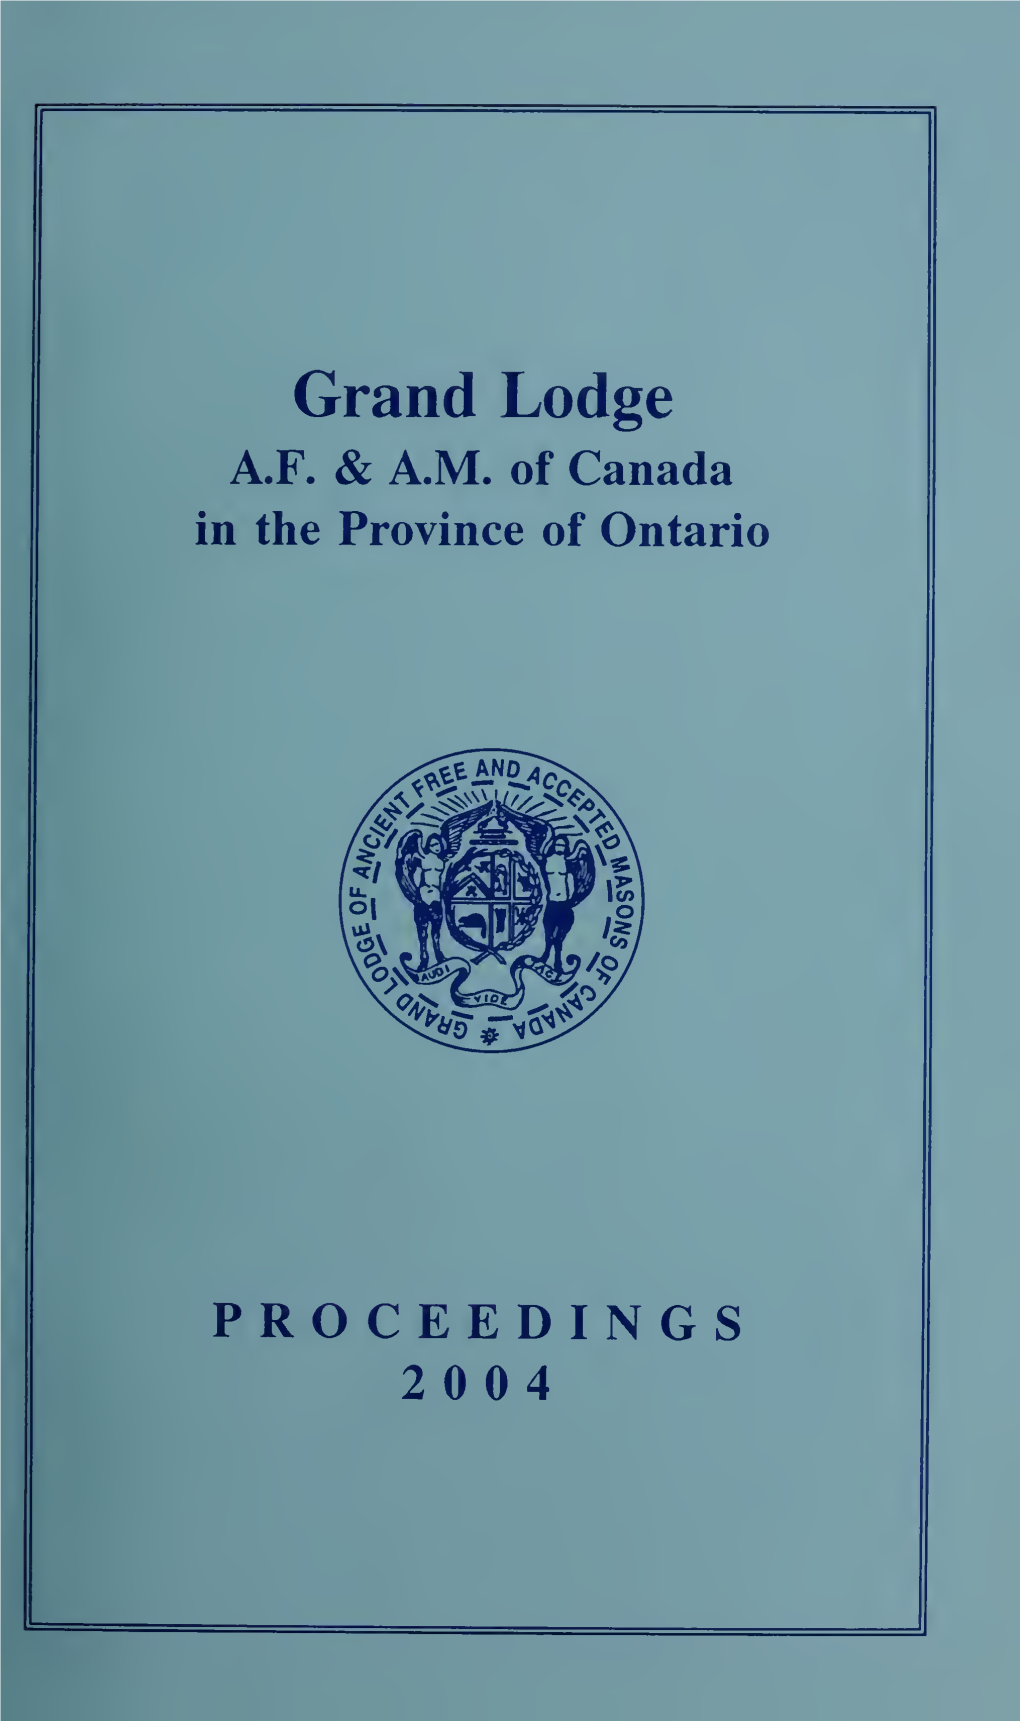 Proceedings: Grand Lodge of A.F. & A.M. of Canada, 2004